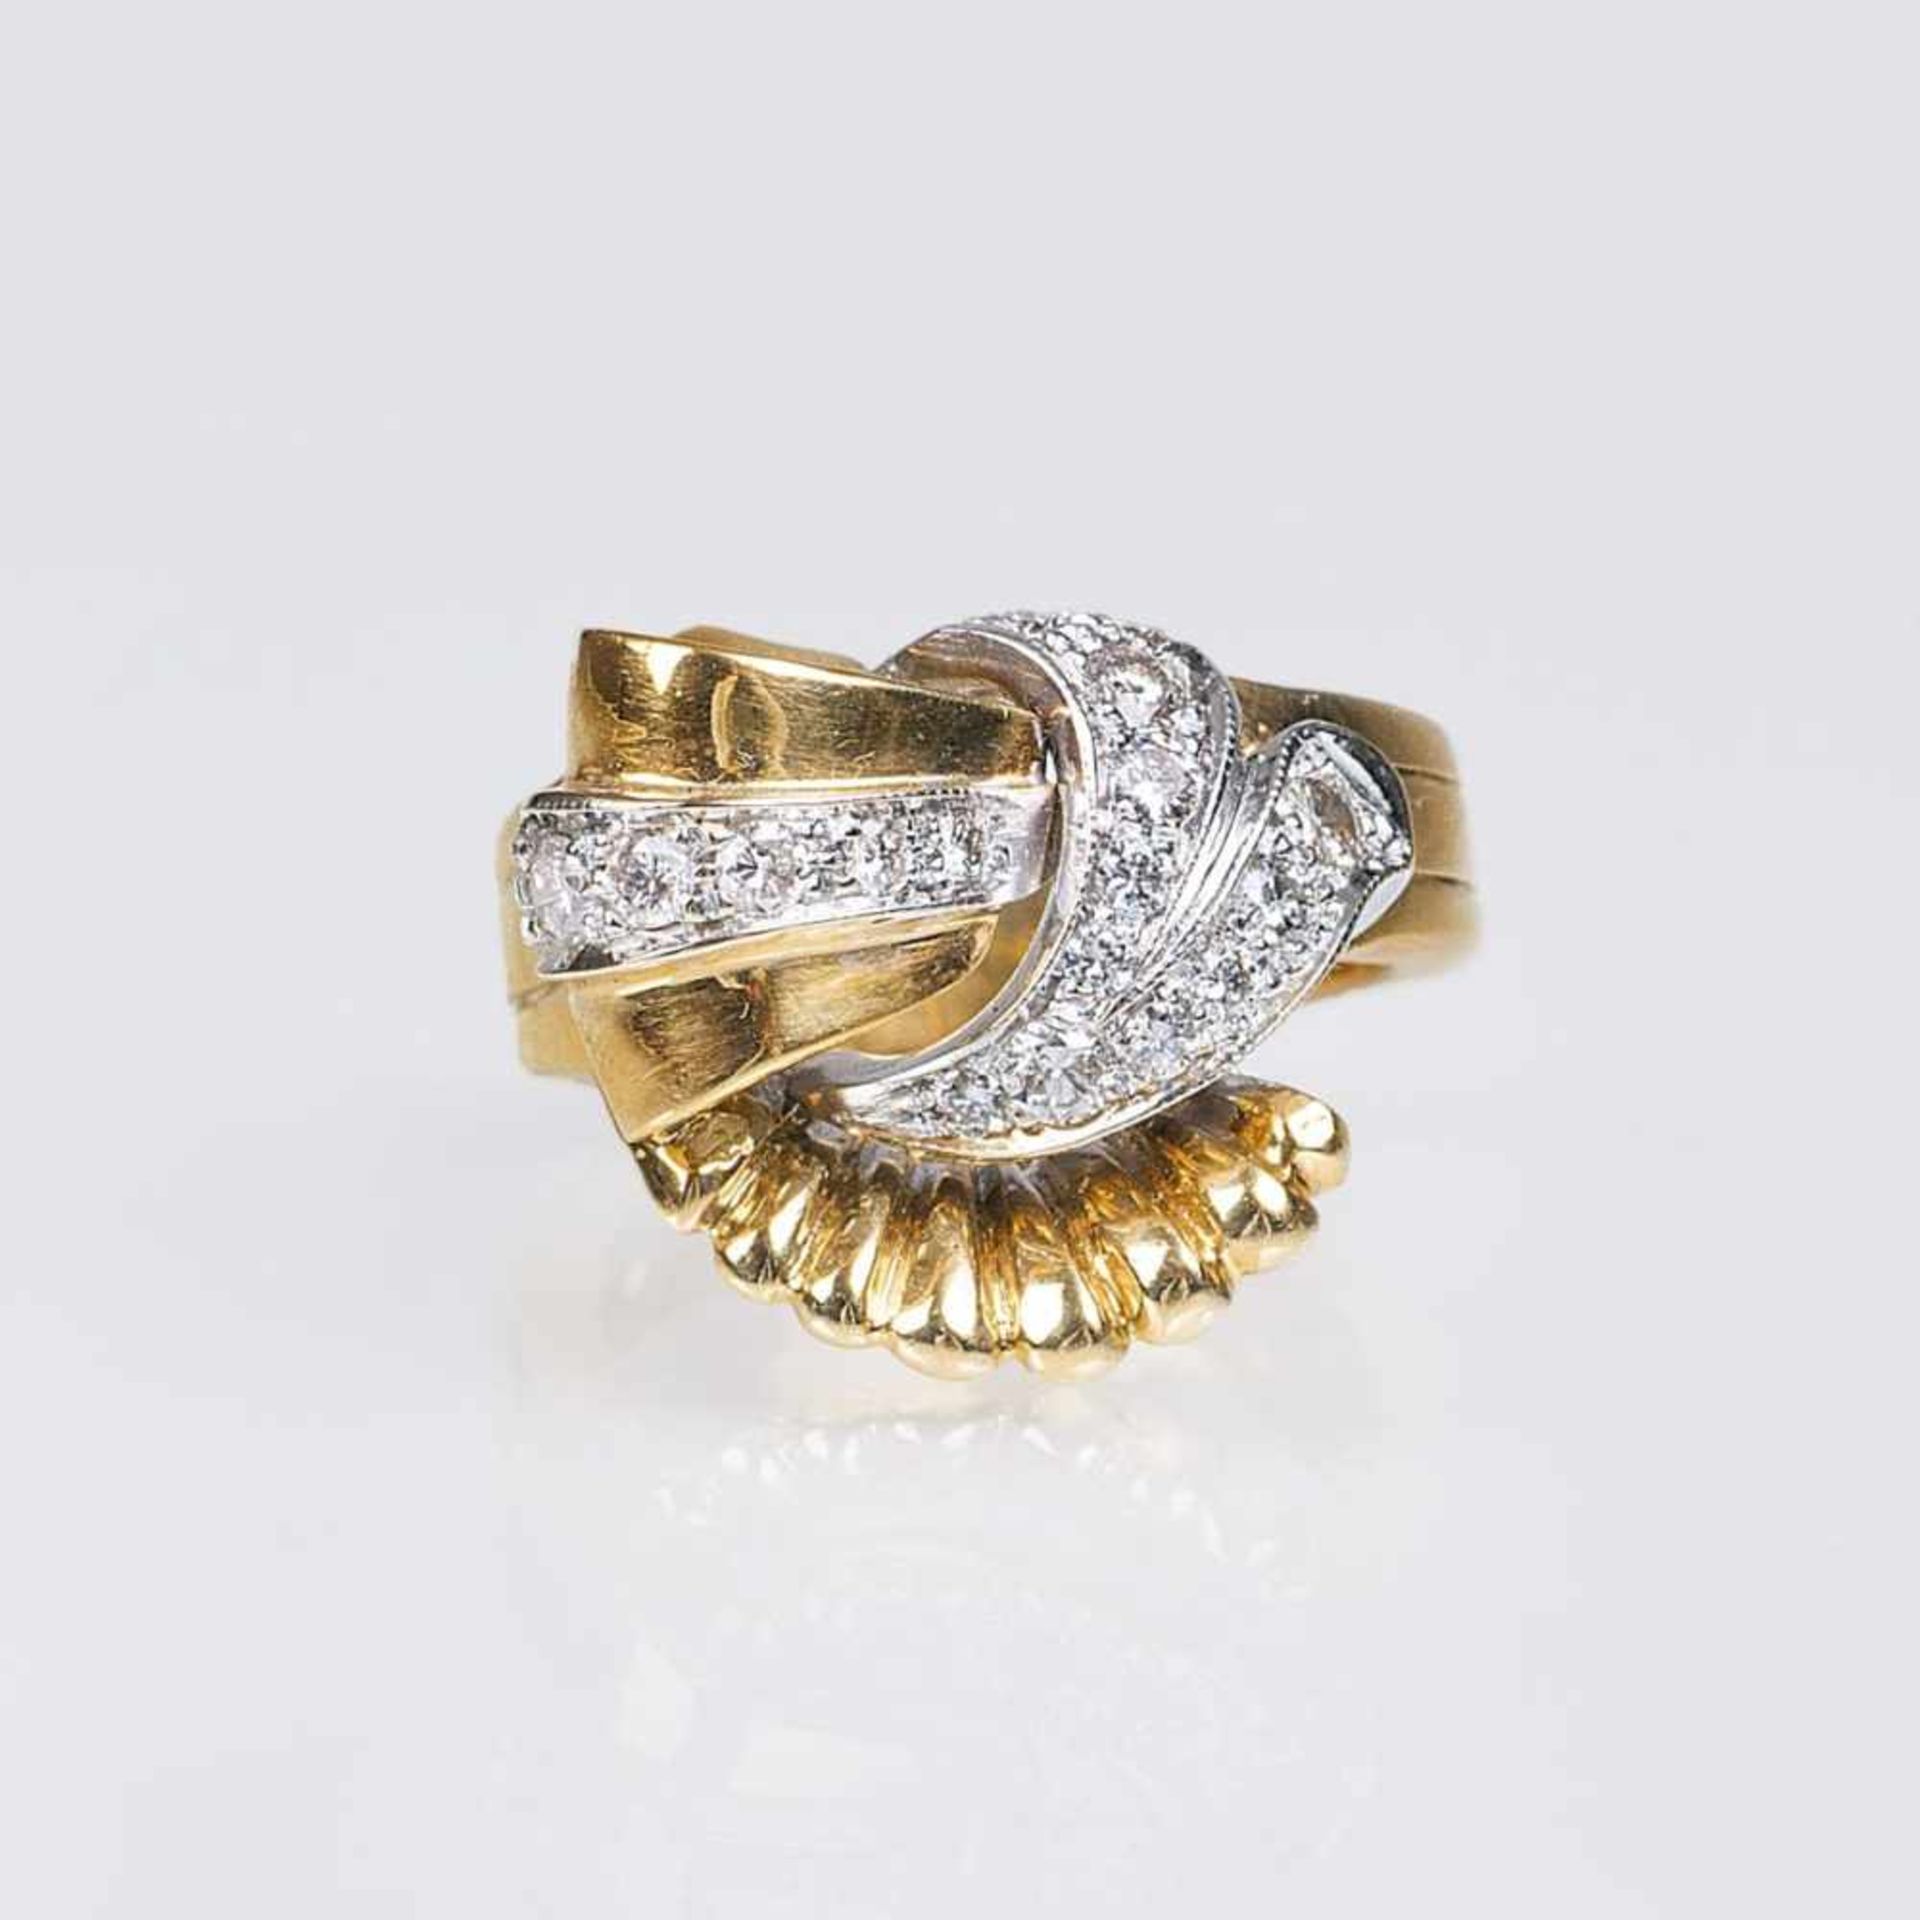 A Diamond Ring in Art-déco Style18 ct. yellow gold with white gold, marked. In pavésettings 17 round